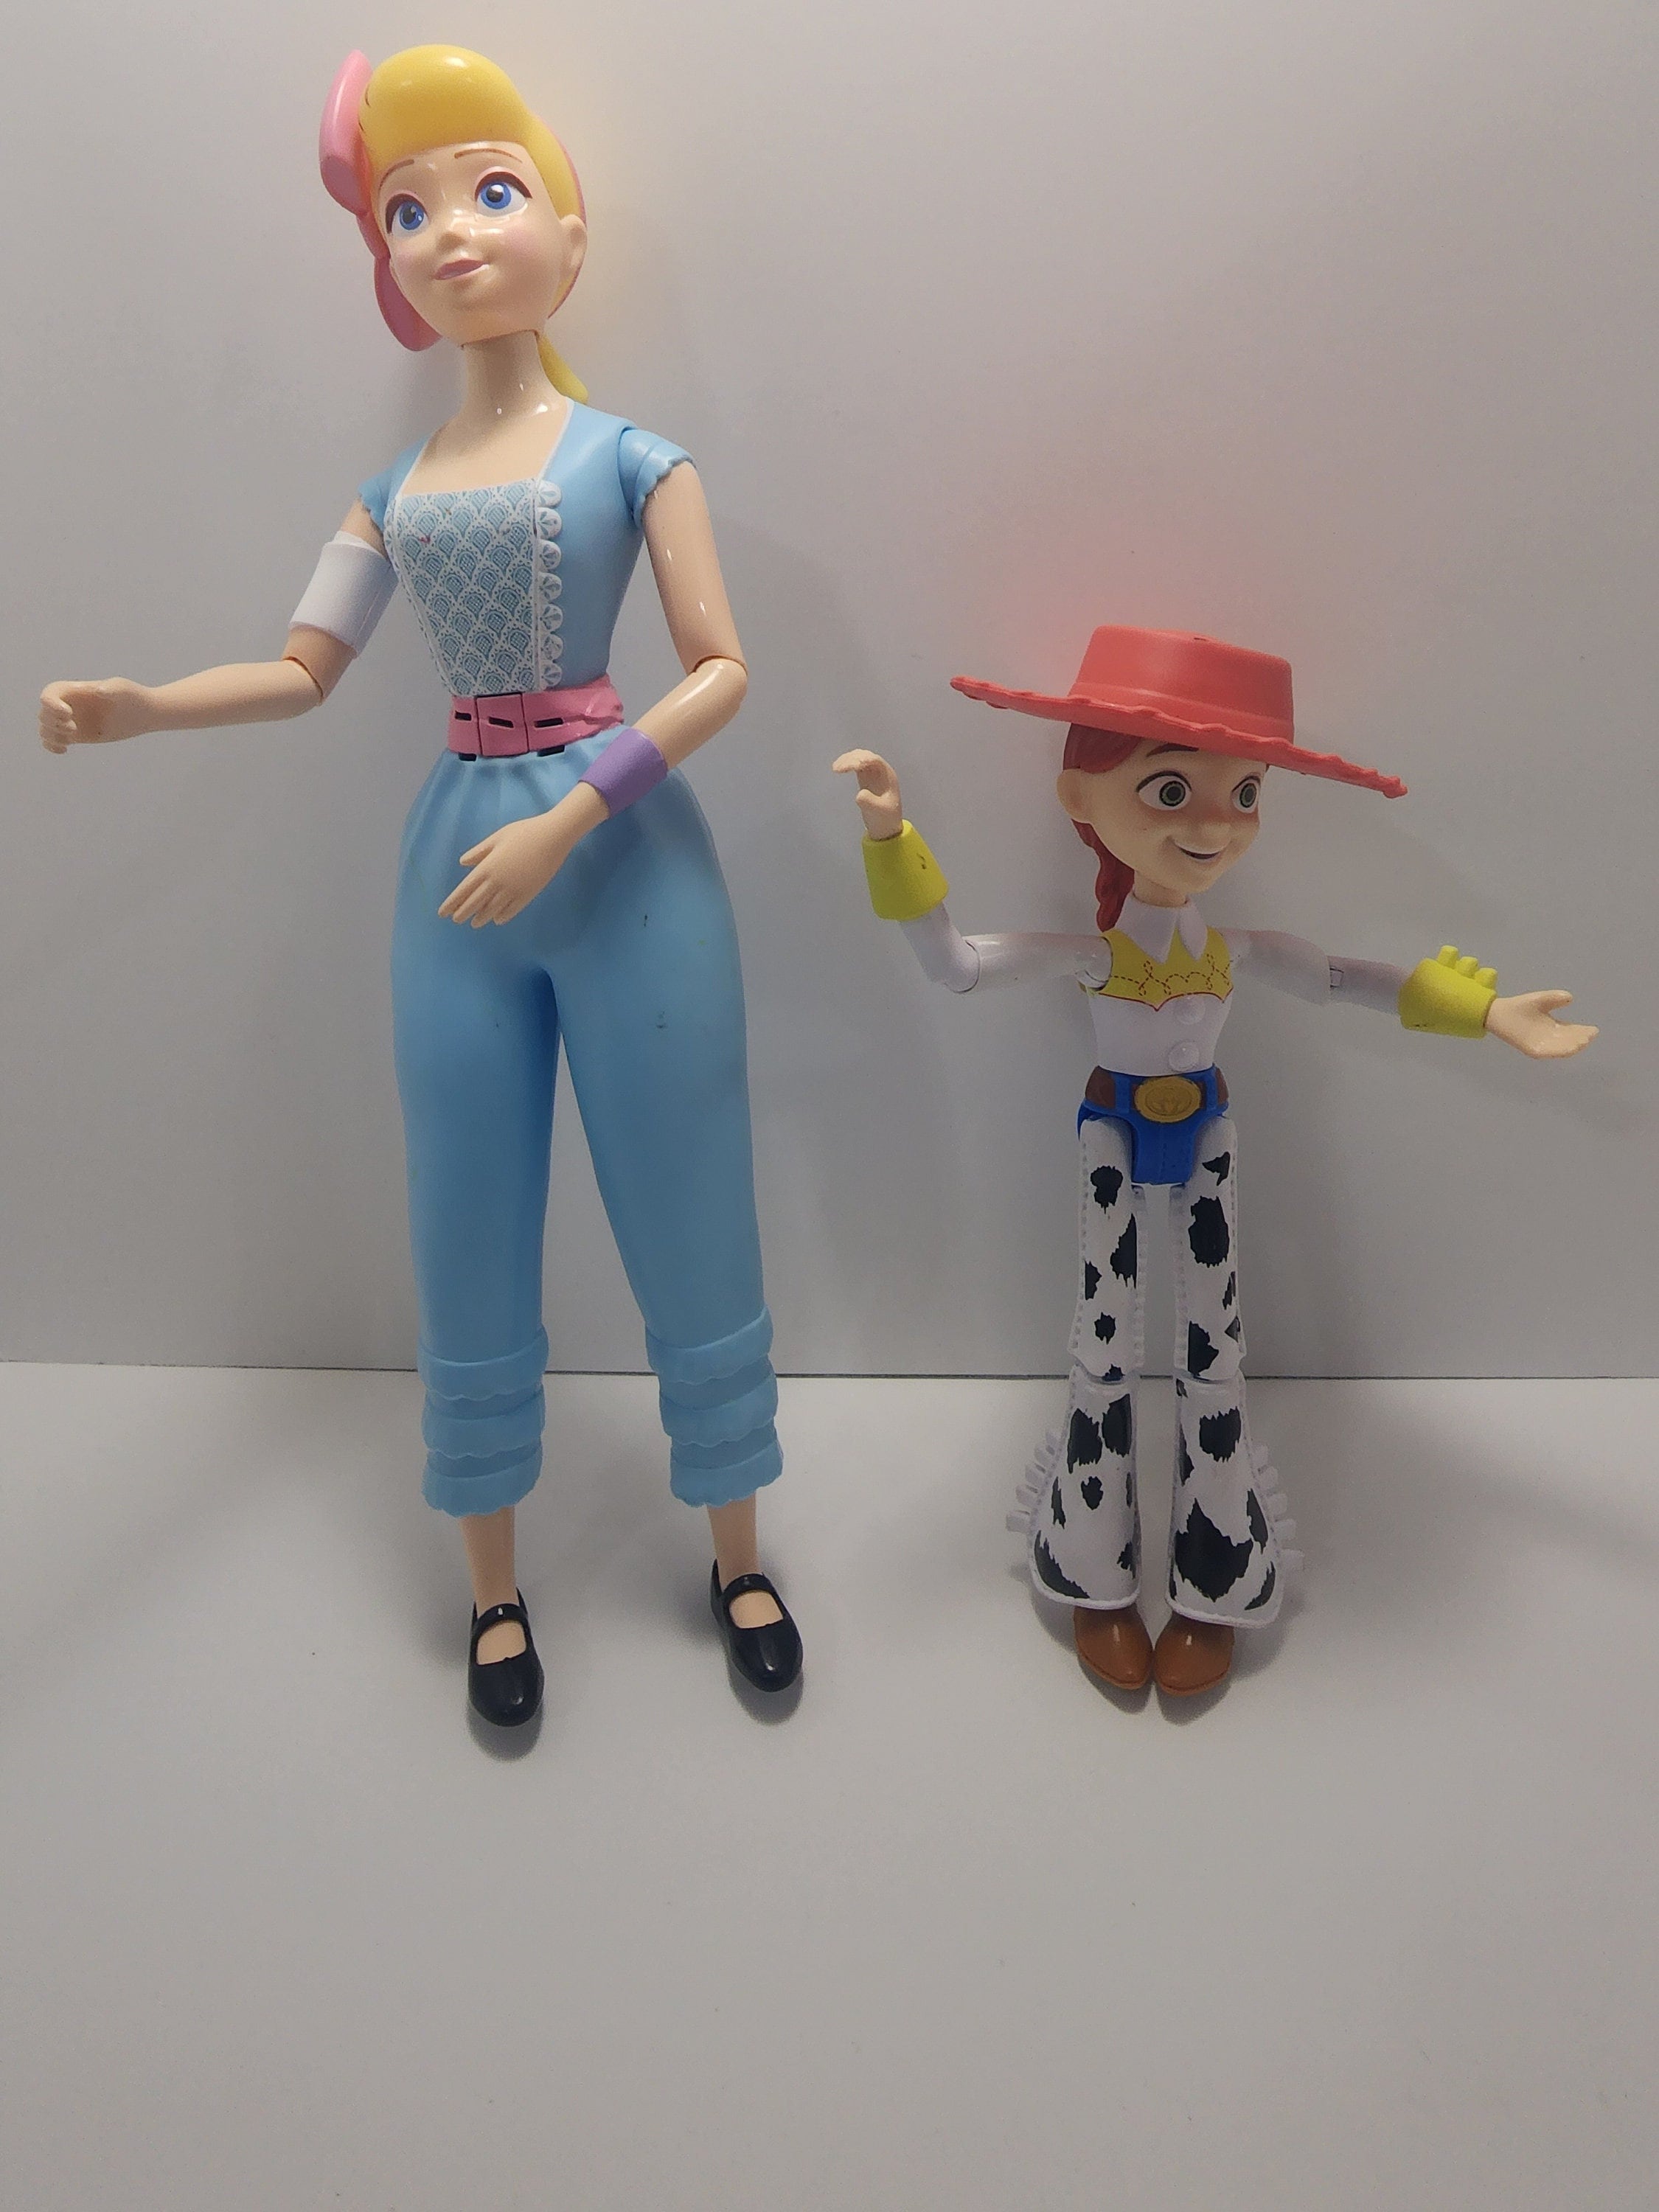 Vintage Toy Story 2: Cone Crossing Game by Mattel - 1999 Edition